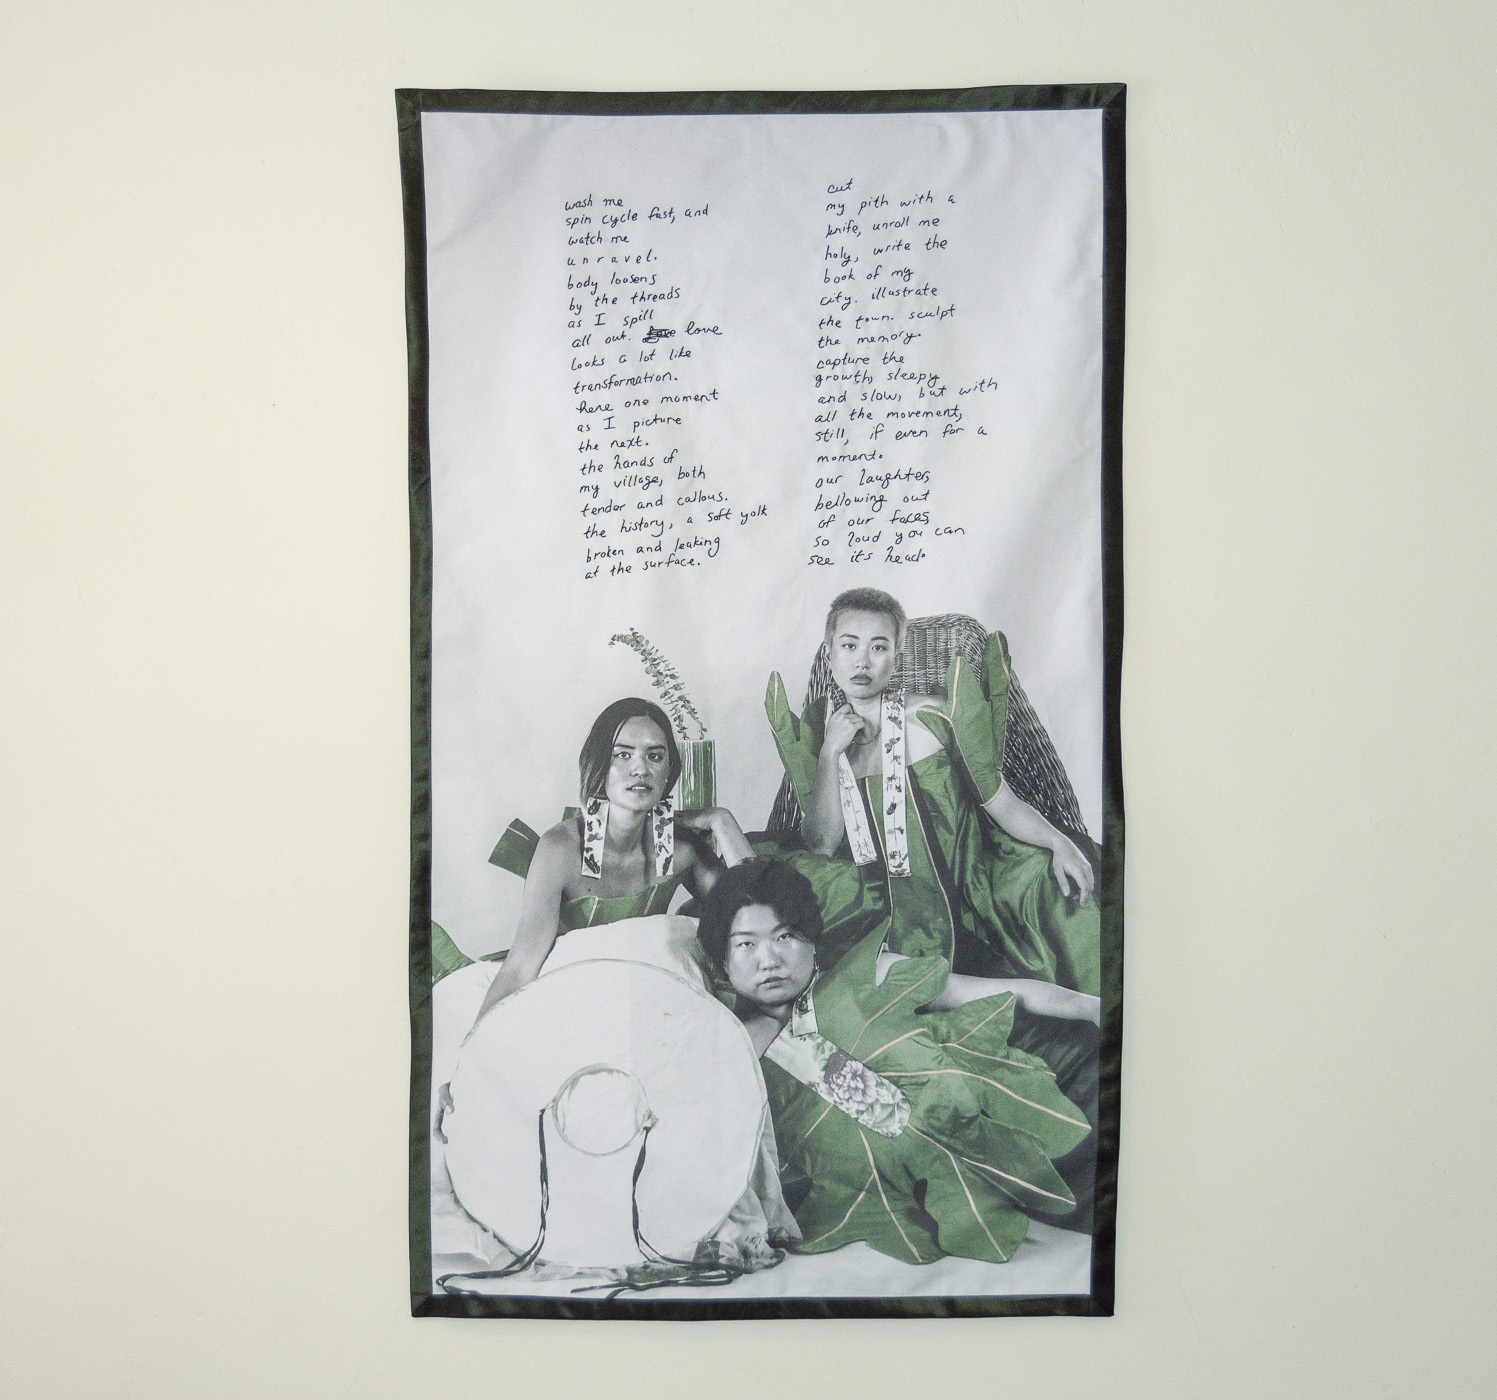 fabric embroidered with a poem and printed with the images of three people wearing green dresses